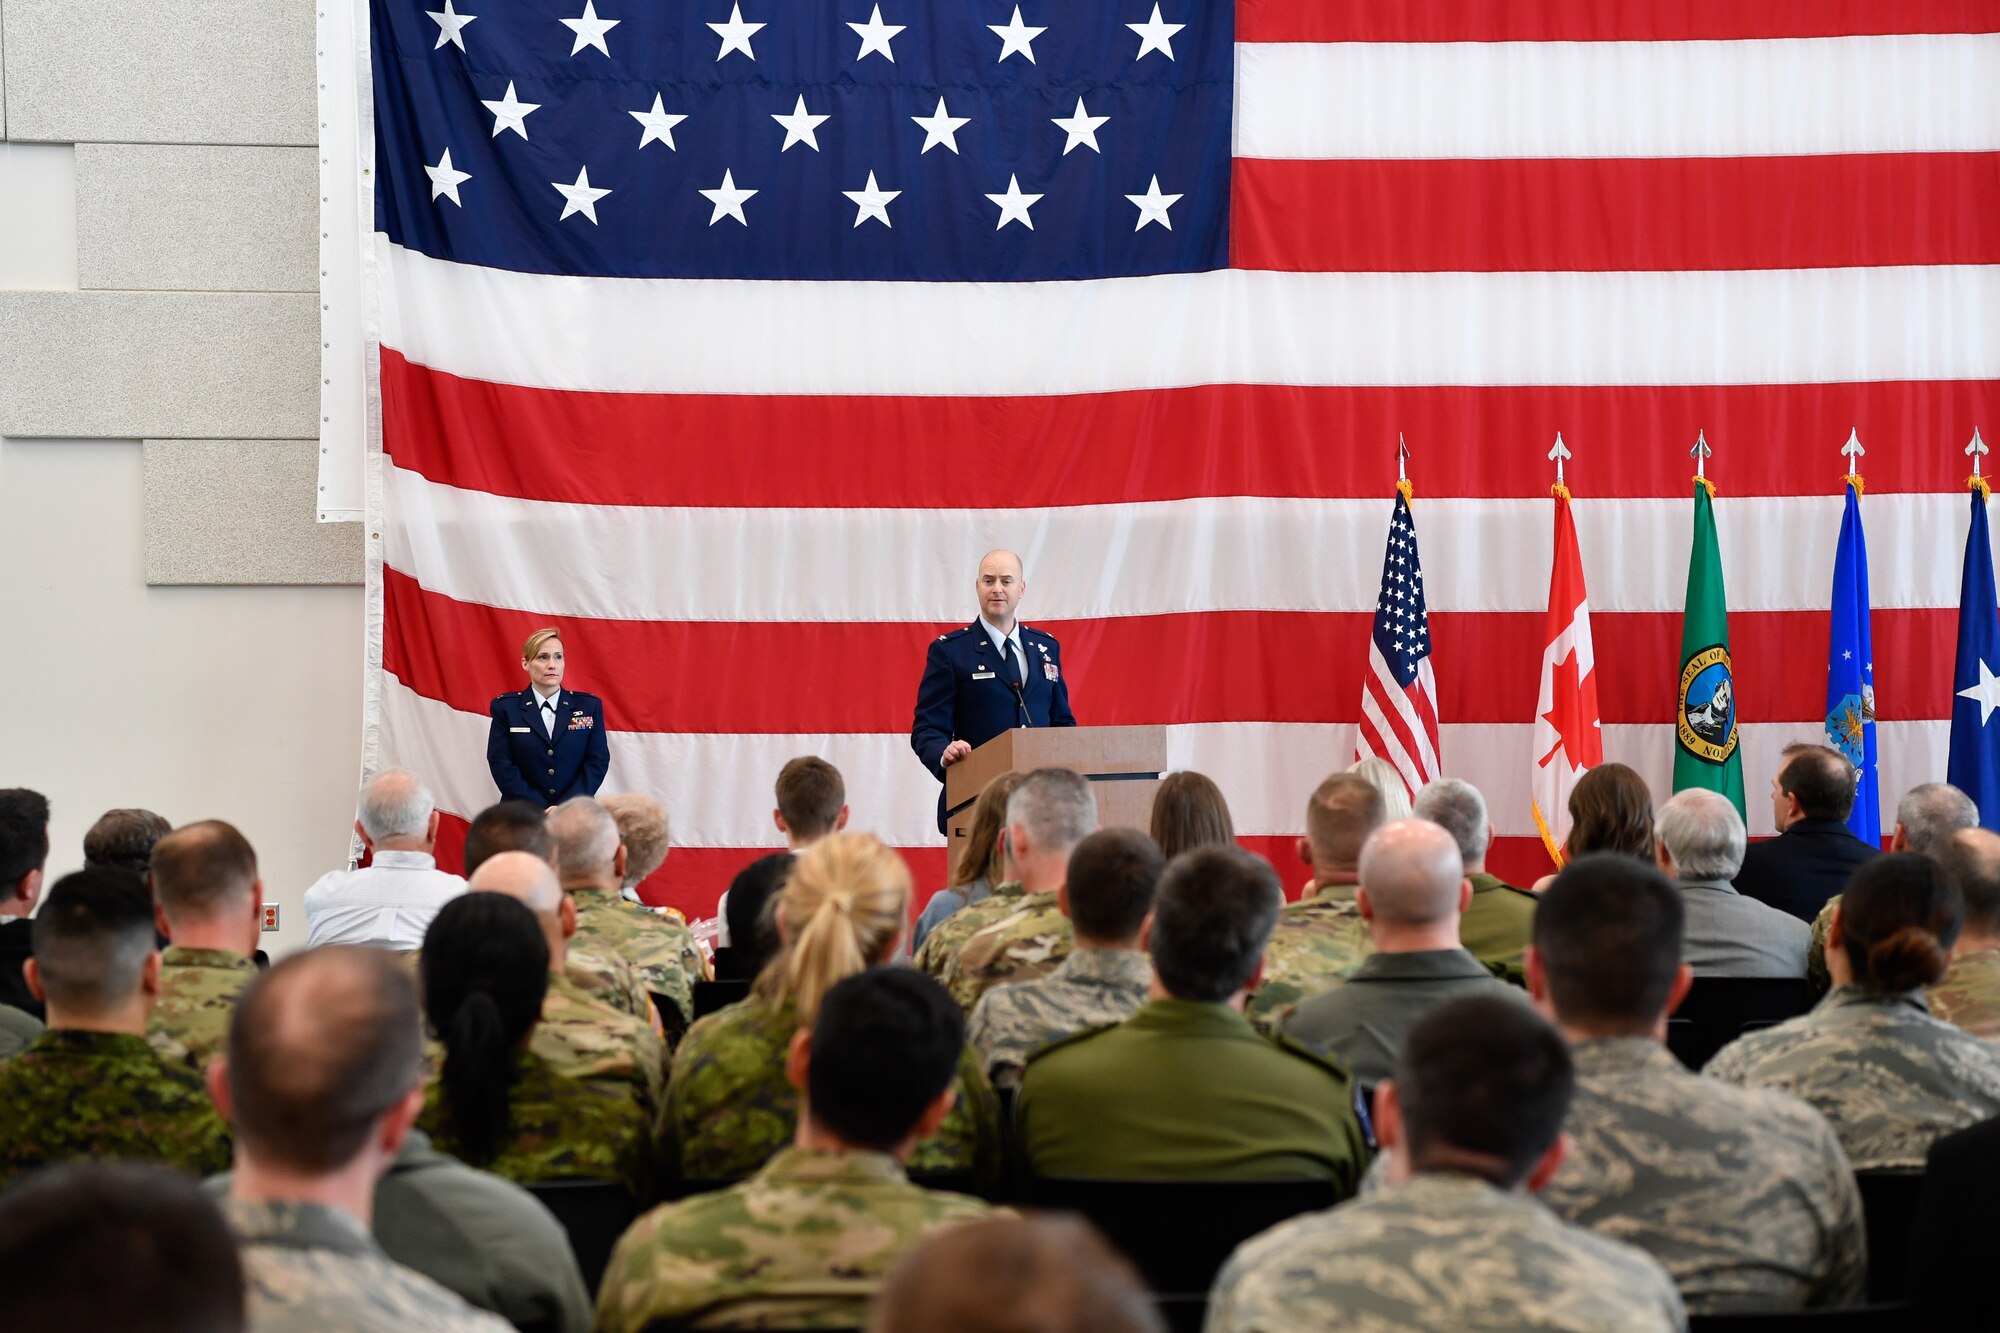 Col. Brett Bosselmann addresses the 225th Support Squadron after assuming command at the Pierce County Readiness Center, Camp Murray, Washington, April 10, 2019. (U.S. Air National Guard photo by Capt. Colette Muller)